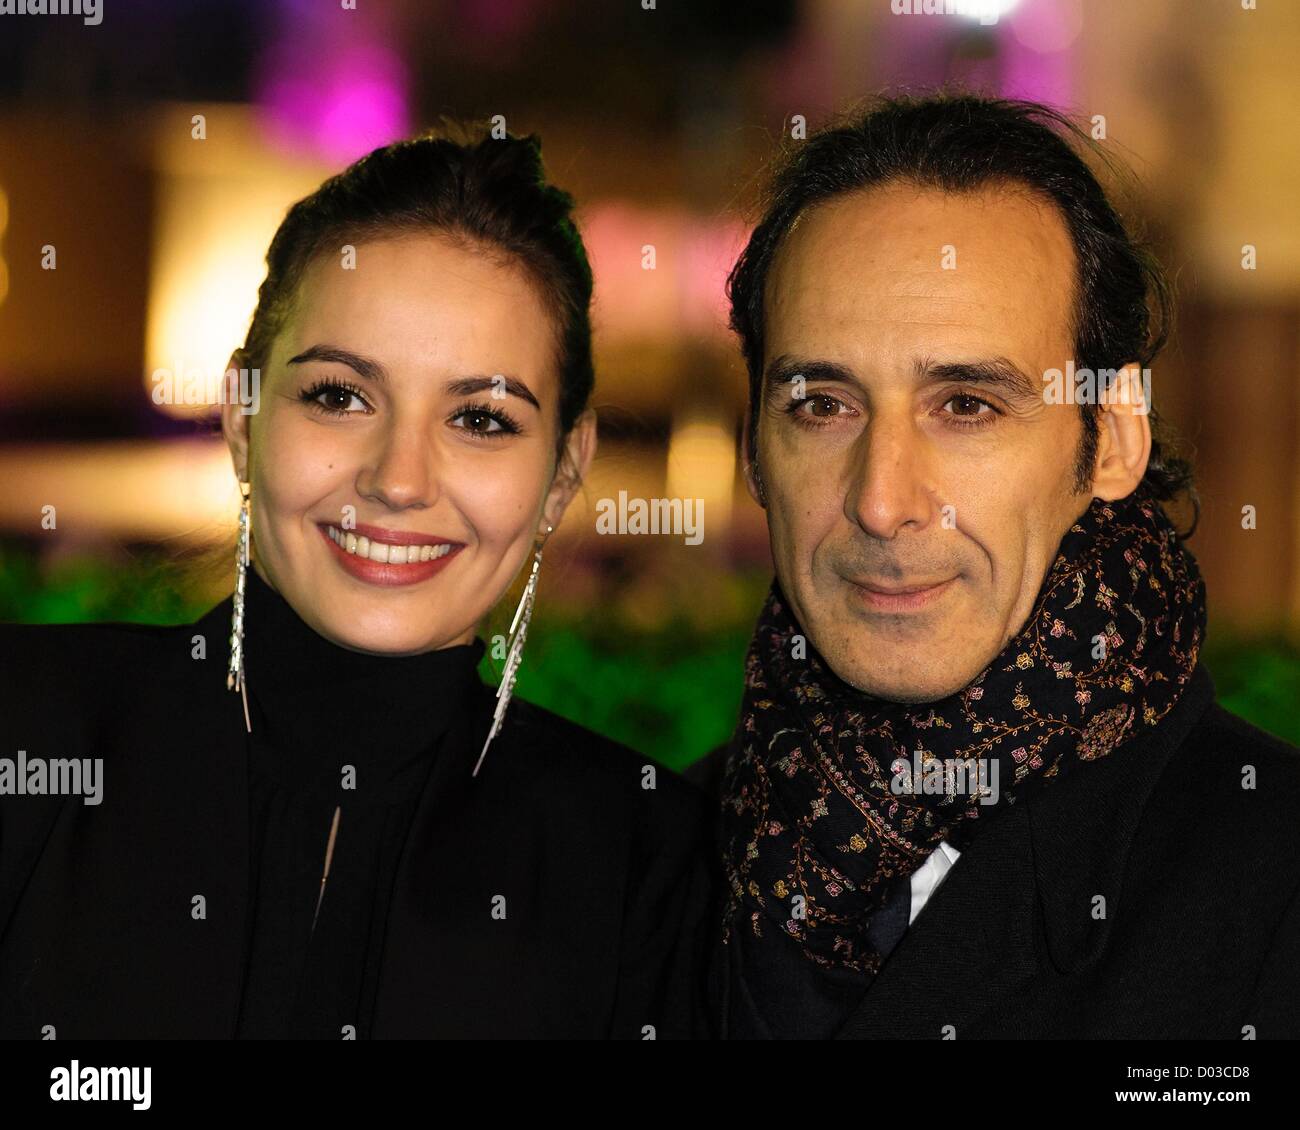 Alexandre Desplat (Composer) with his daughter attends the UK Premiere of Rise of the Guardians on 15/11/2012 at The Empire Leicester Square, London. Persons pictured: Alexandre Desplat (Composer). Picture by Julie Edwards Stock Photo